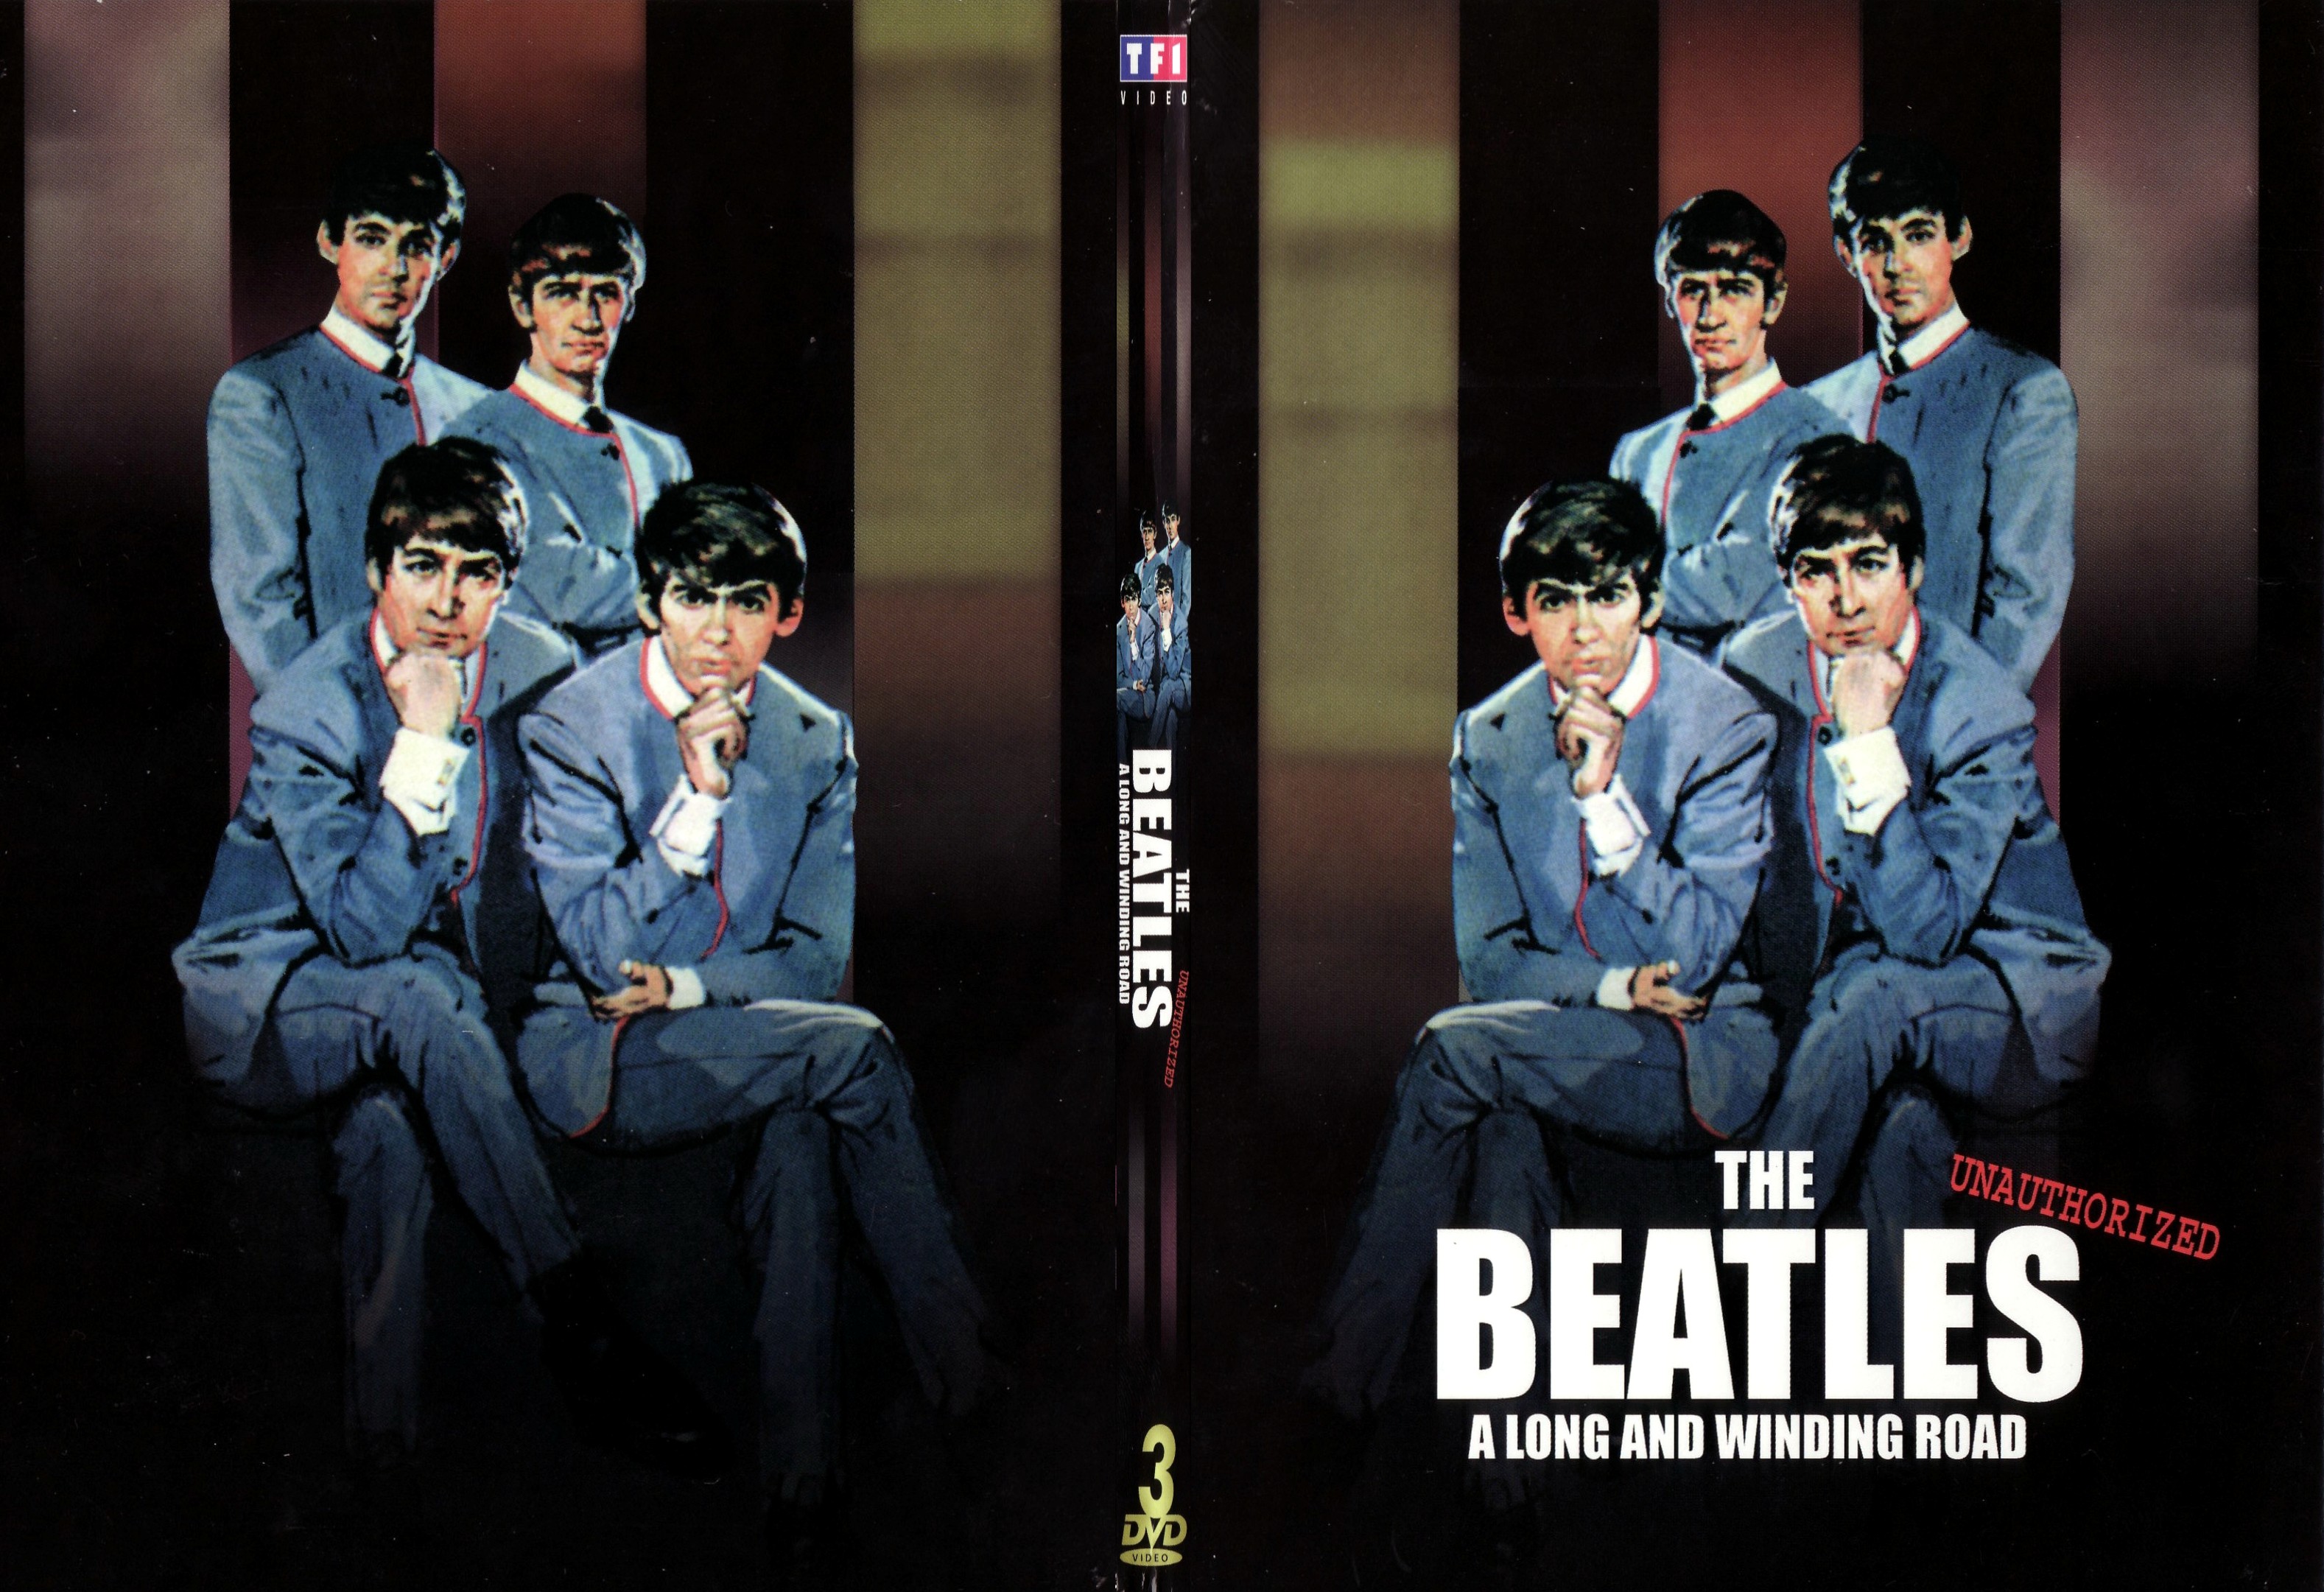 Jaquette DVD The Beatles a long and winding road - SLIM v2